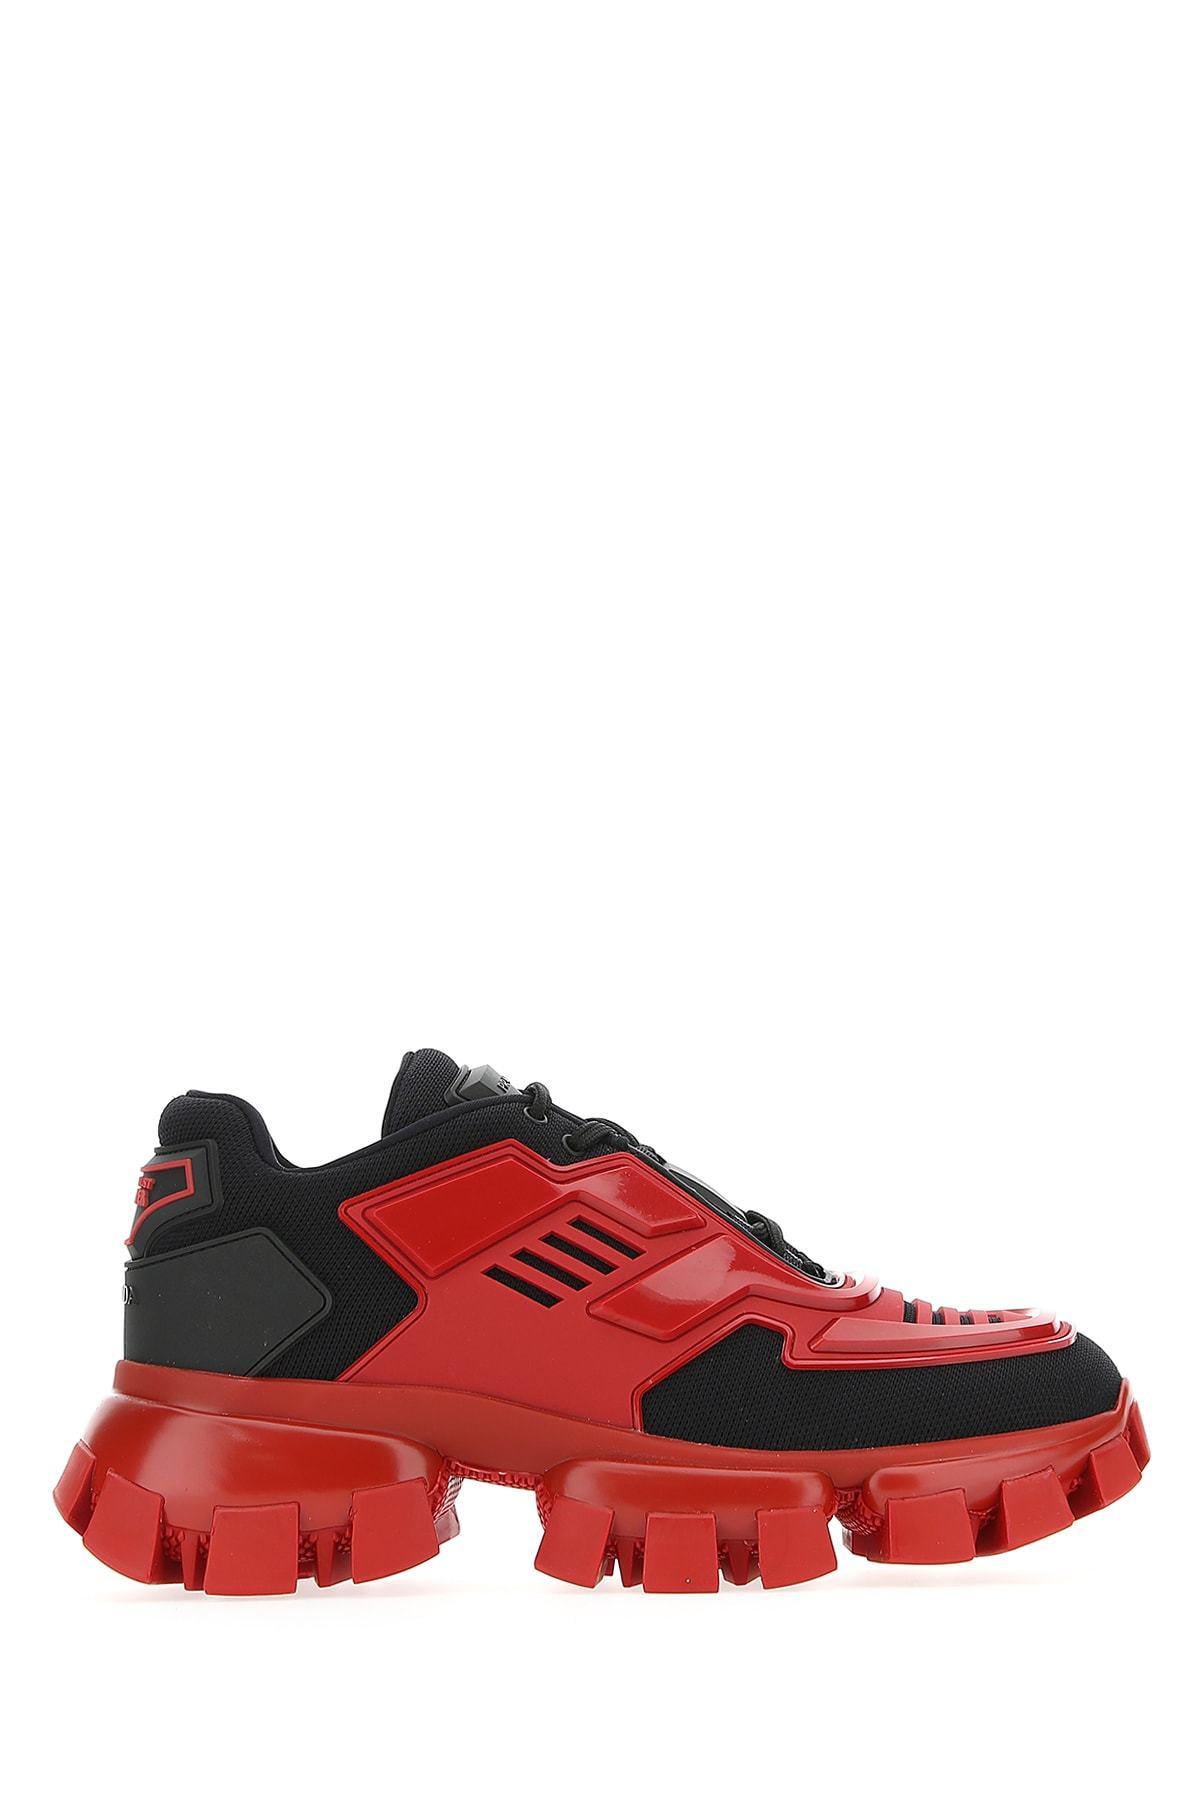 Prada Rubber Cloudbust Thunder Sneakers in Red - Lyst